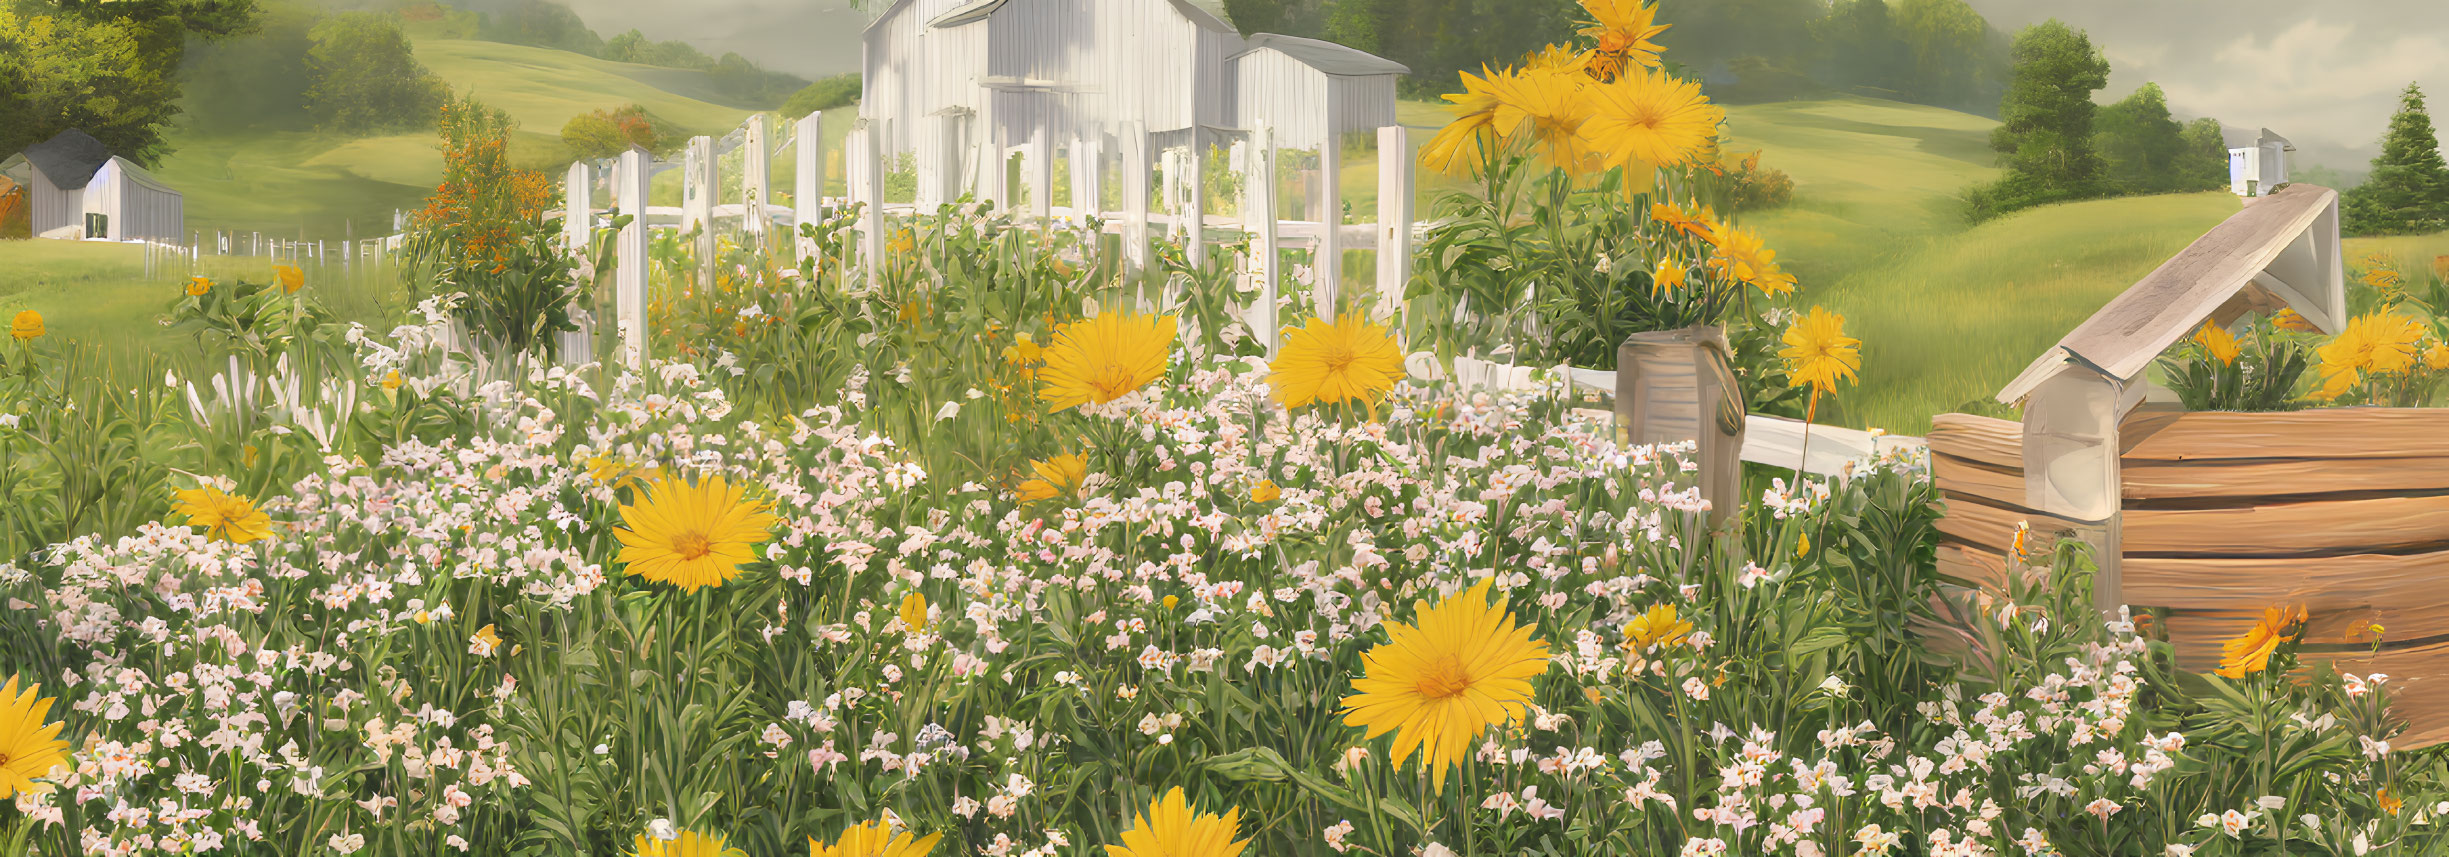 White Wooden Church in Vibrant Meadow with Yellow Wildflowers